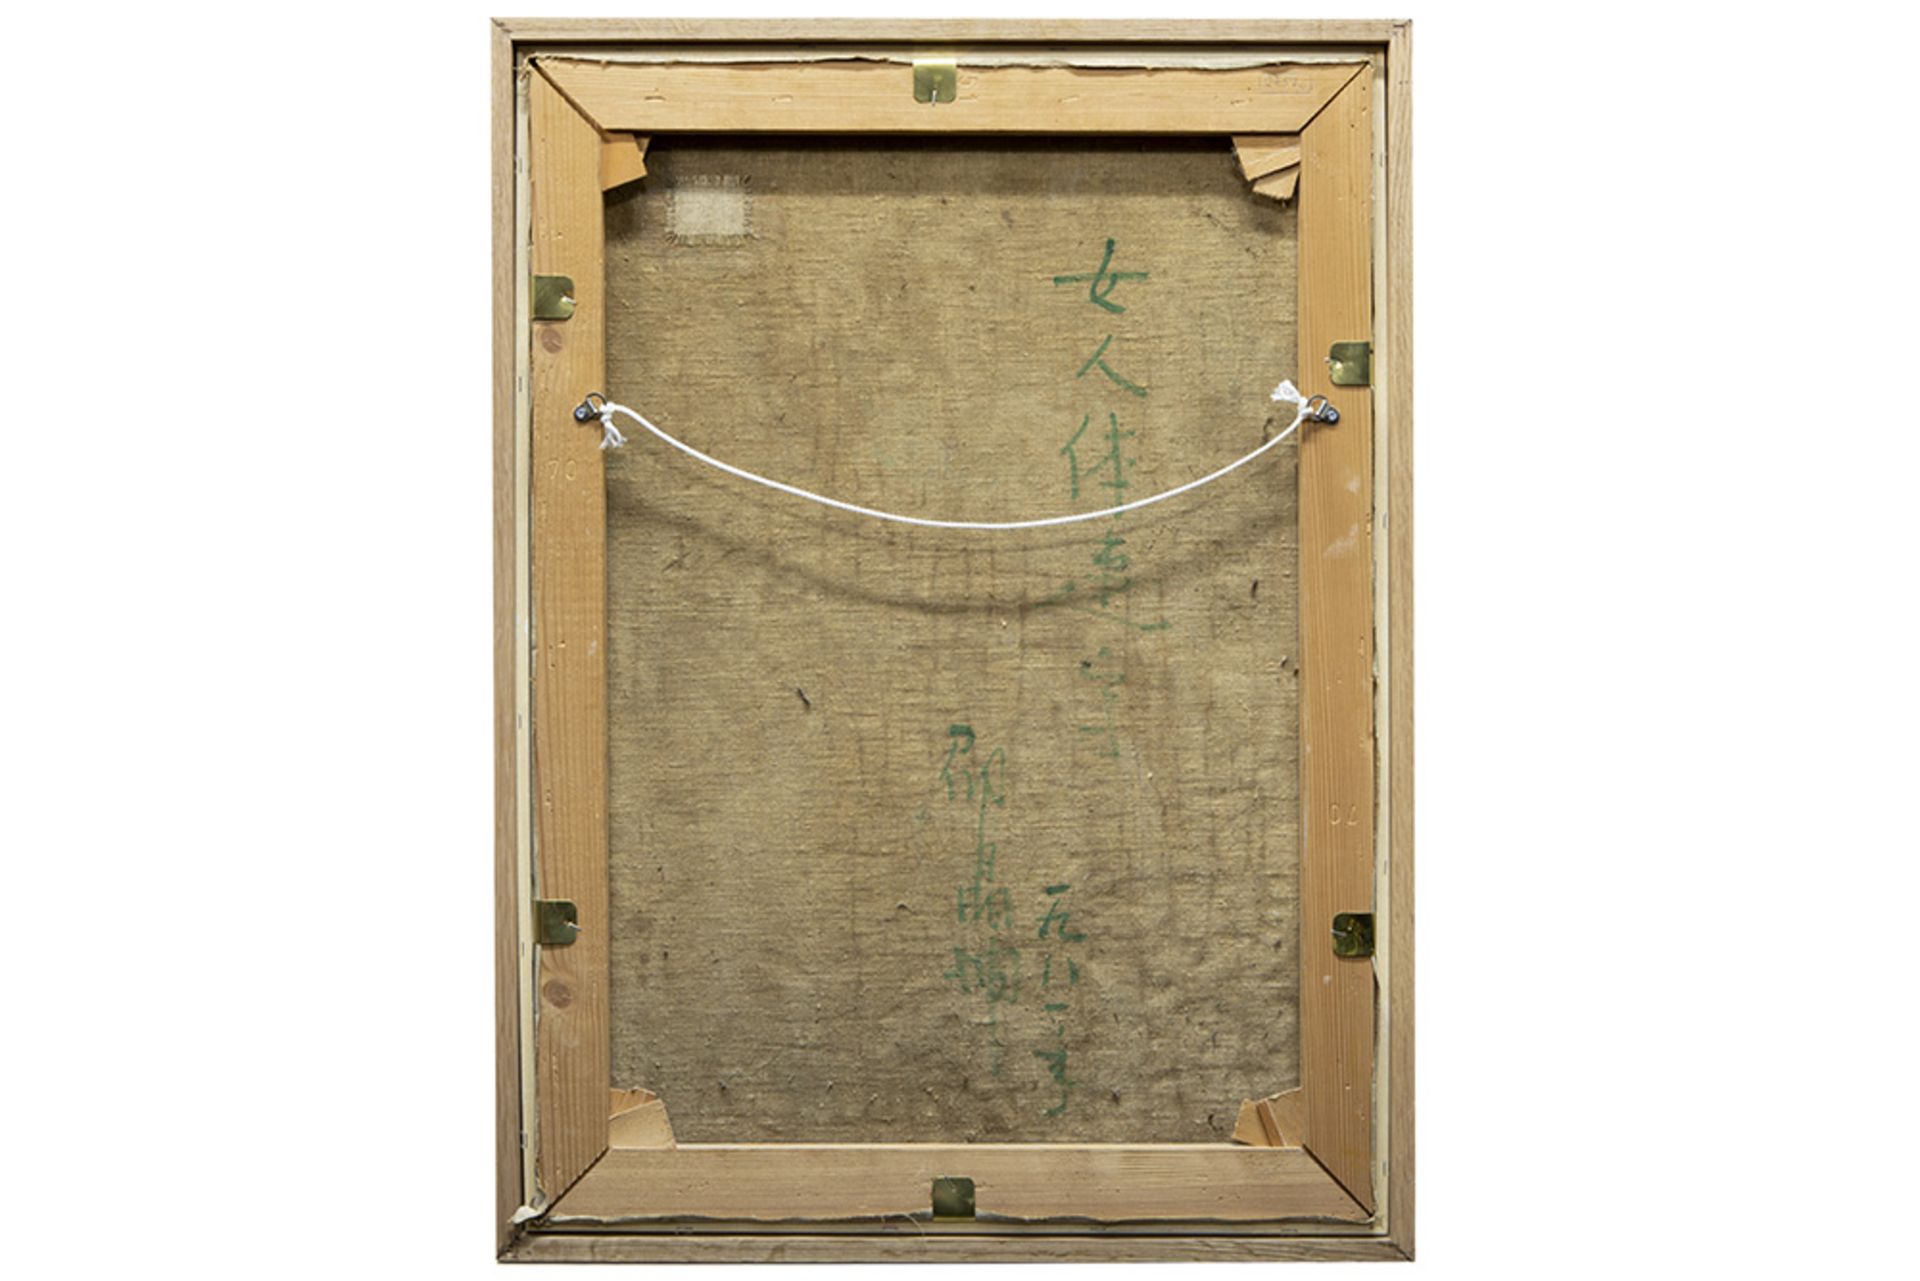 20th Cent. Chinese Jingkun Shao signed oil on canvas- signed on the back || SHAO JINGKUN (° 1932) - Image 3 of 5